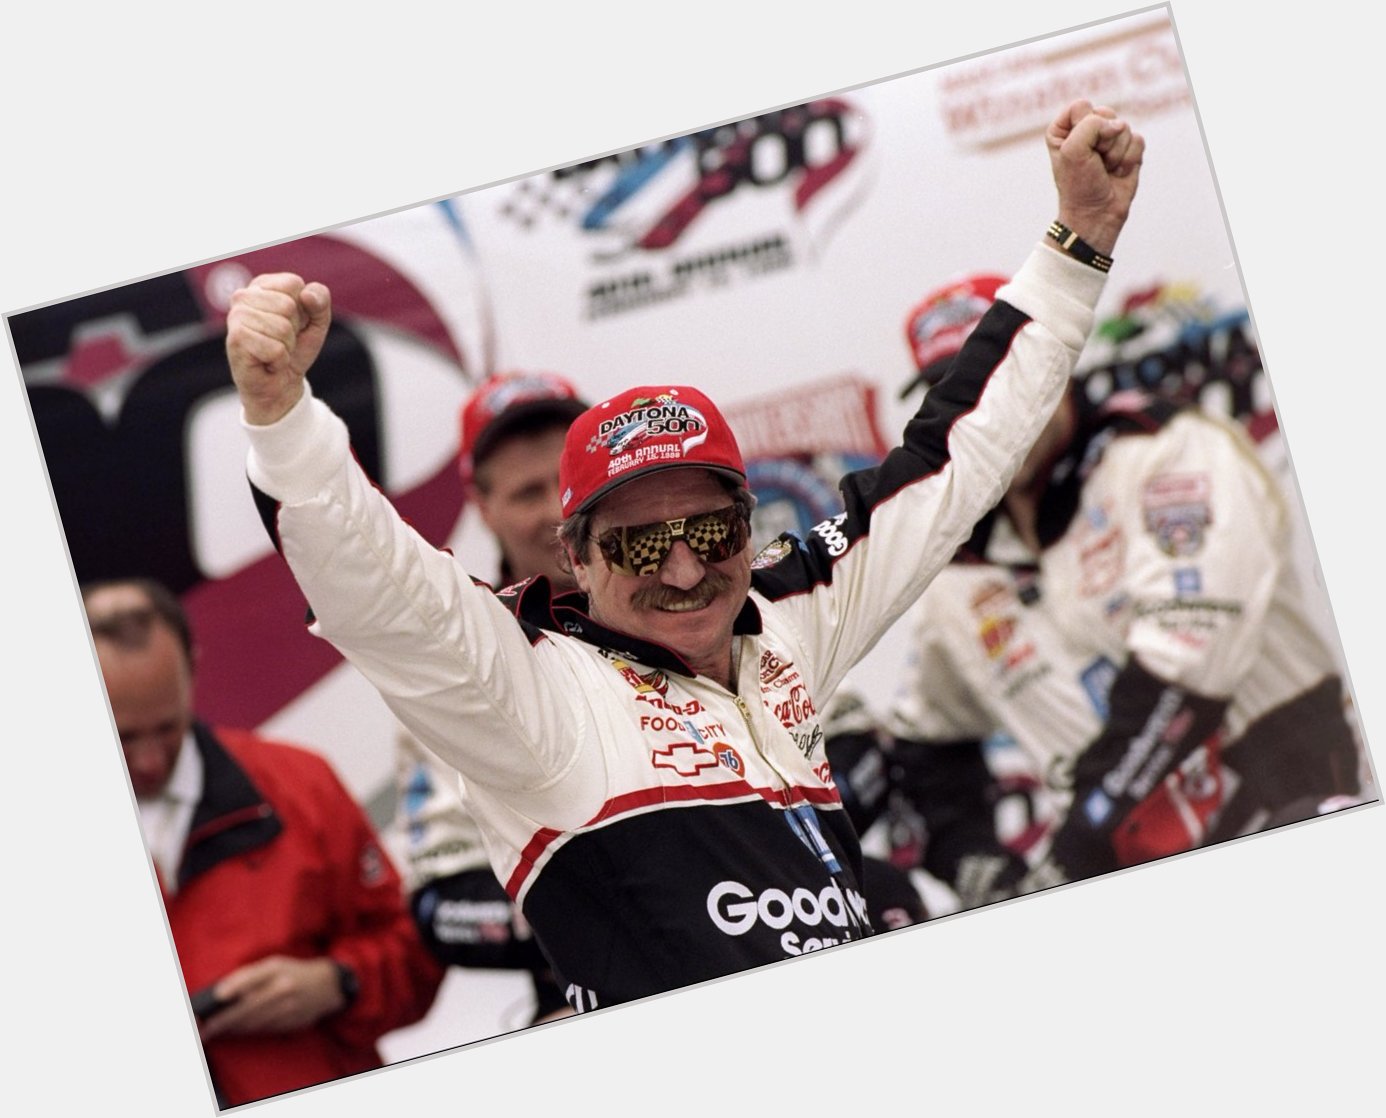 A moment we\ll remember forever. Happy Birthday to the Intimidator, Dale Earnhardt. 